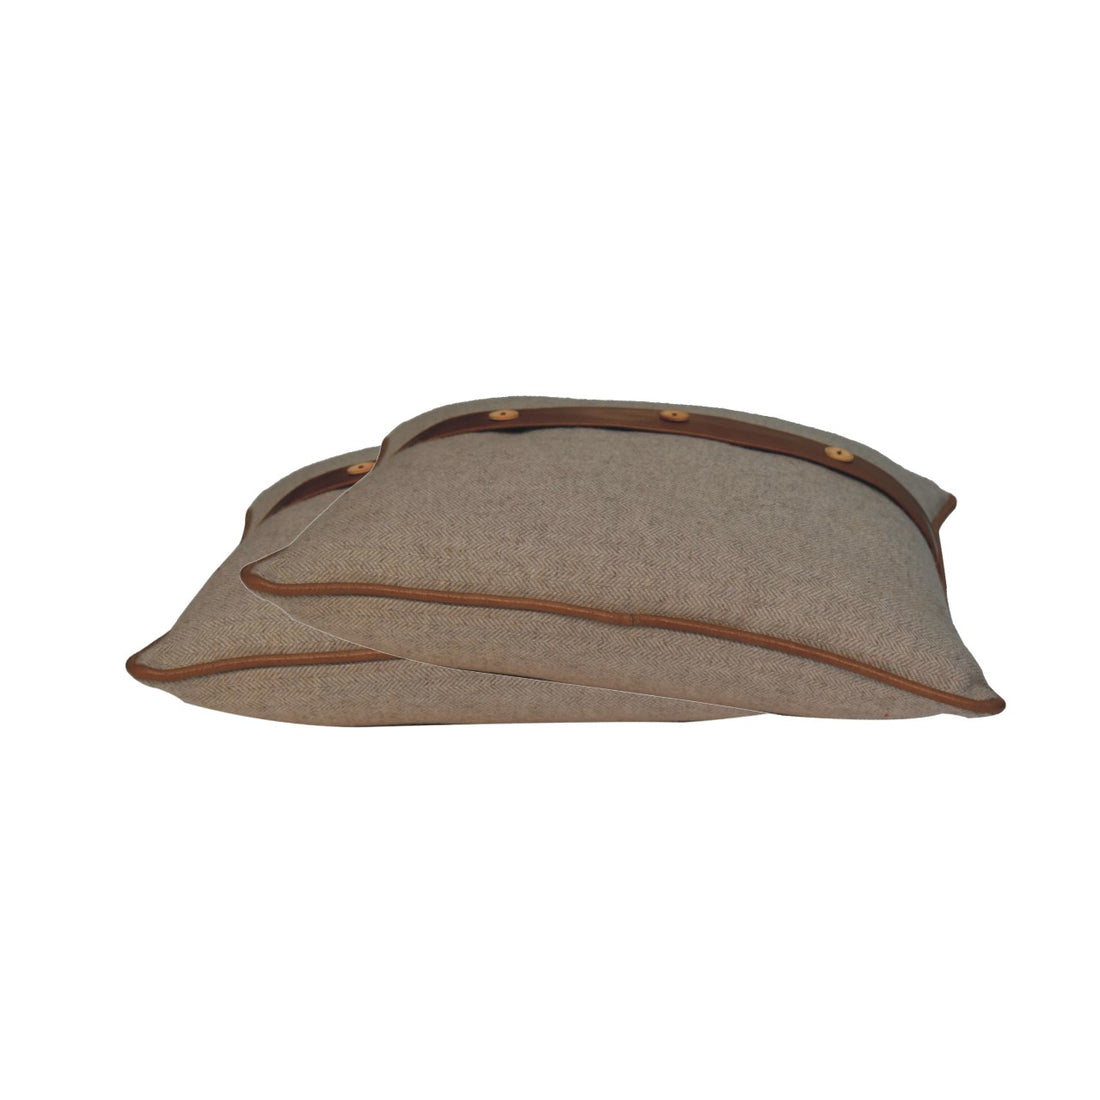 Quin Leather Sand Cushion Set of 2